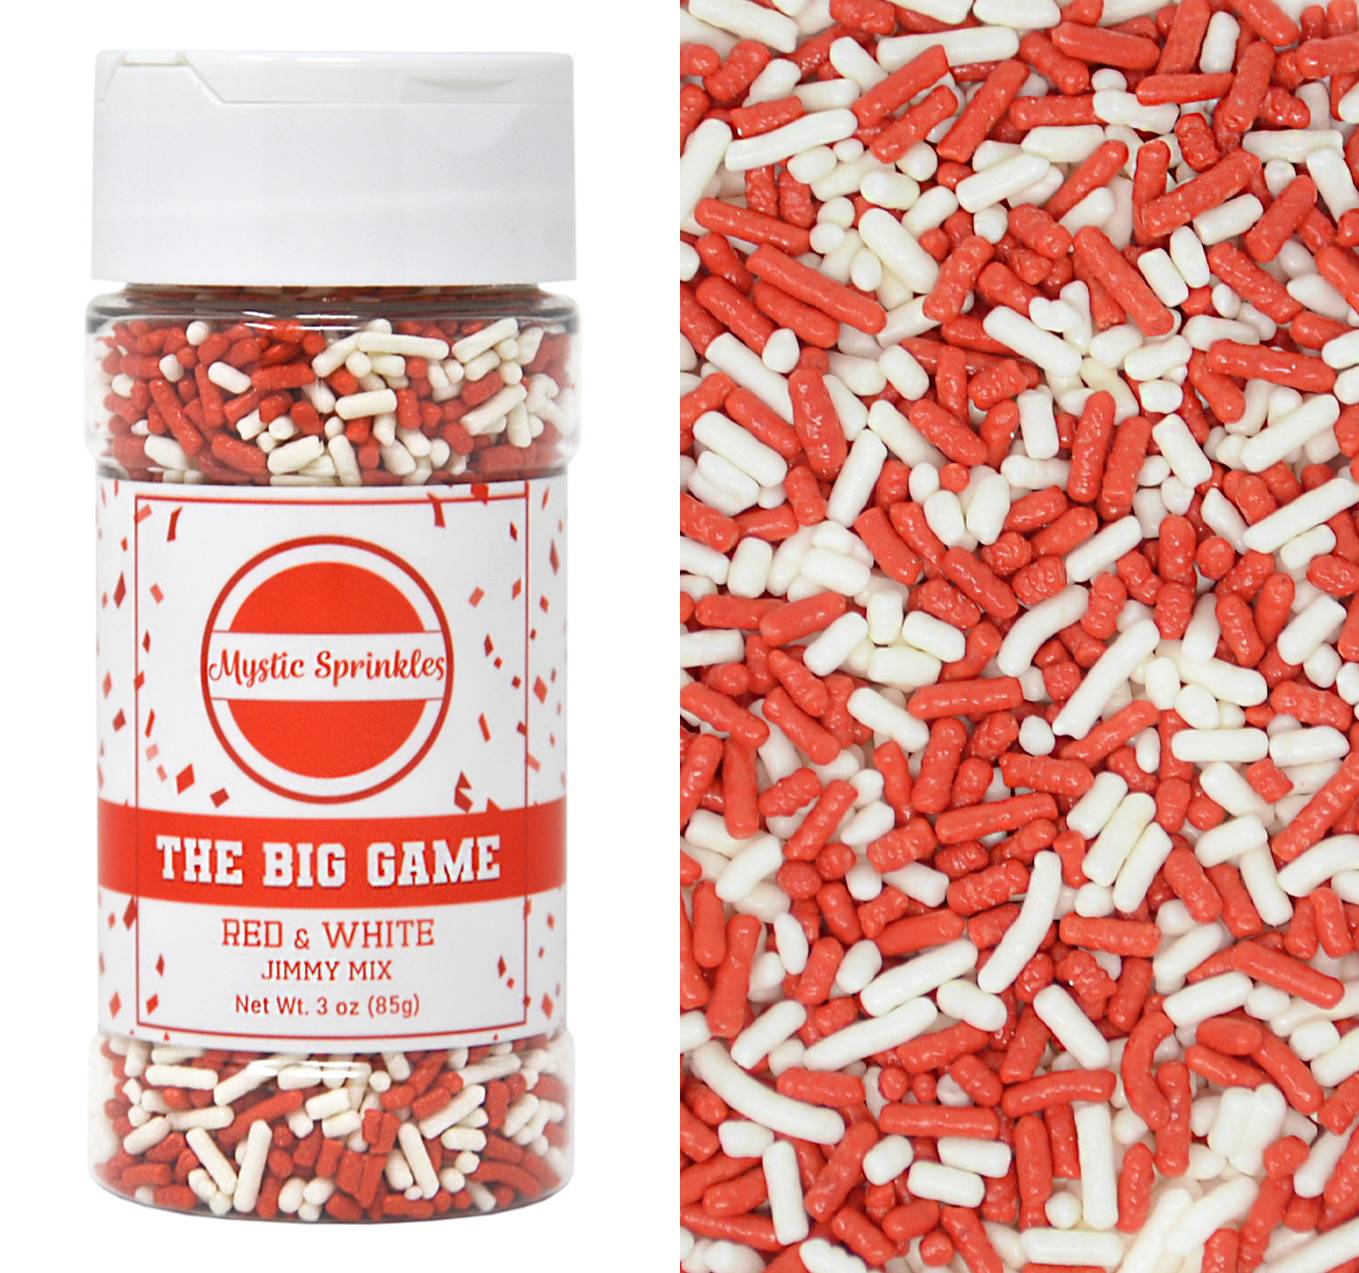 The Big Game: Red & White Jimmy Mix 3oz Bottle